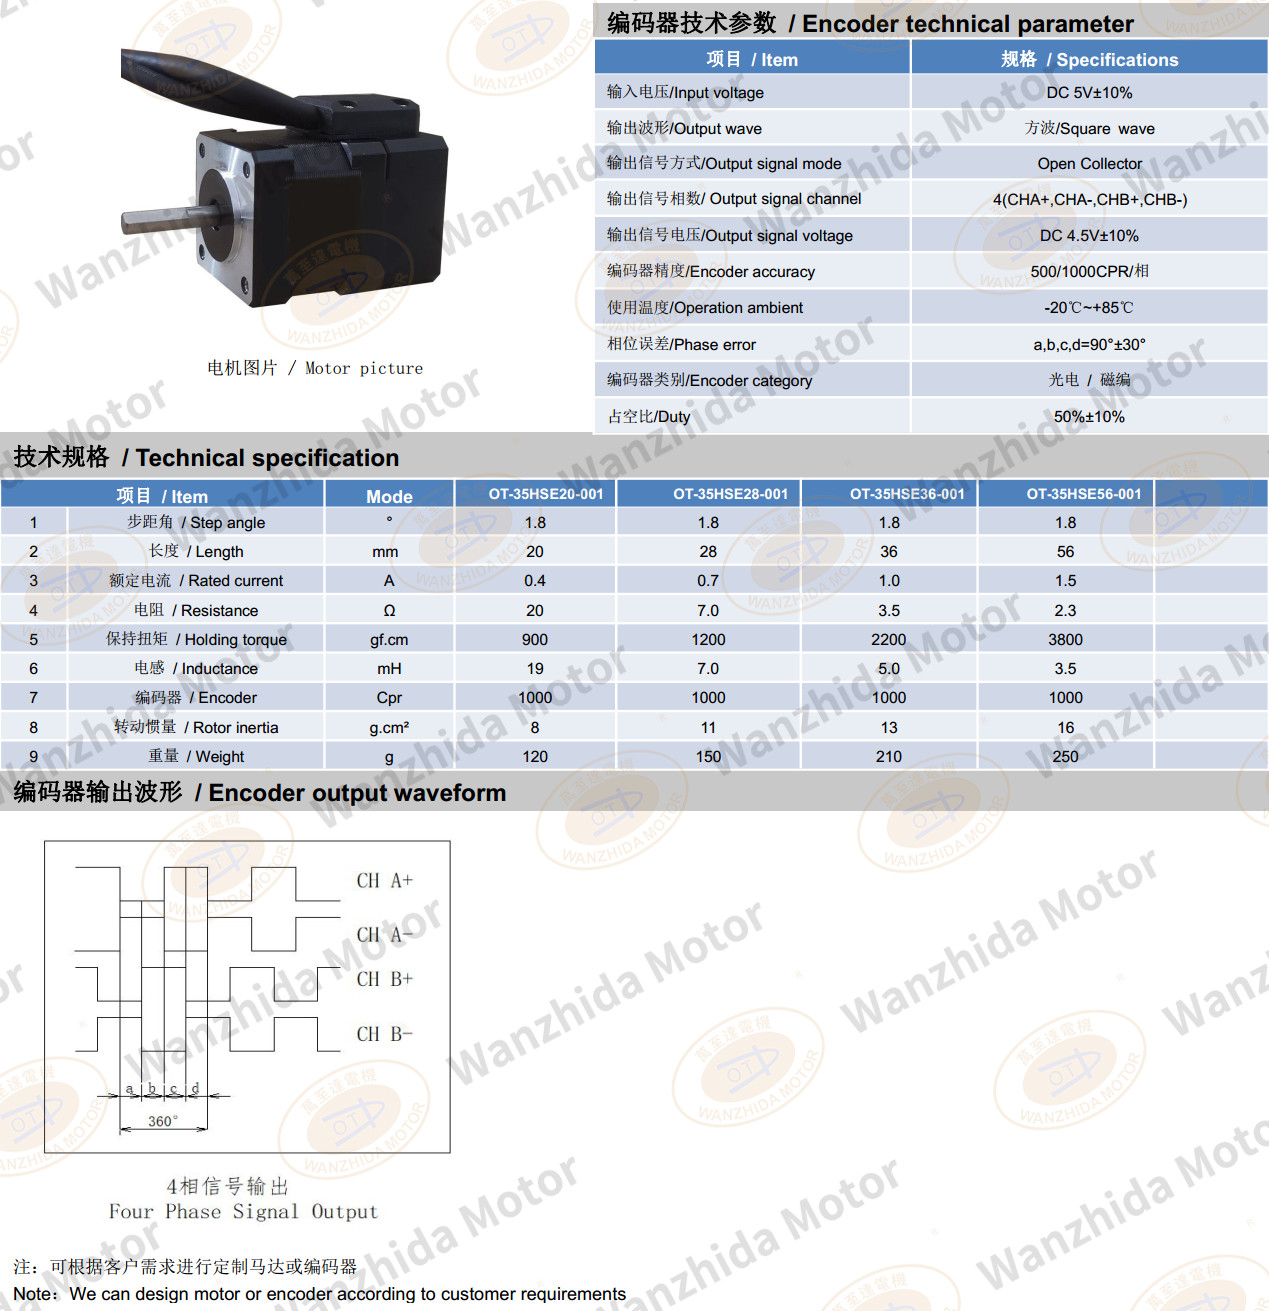 1.8° two-phase closed loop stepping motor_35mm stepper motor-wanzhida motor